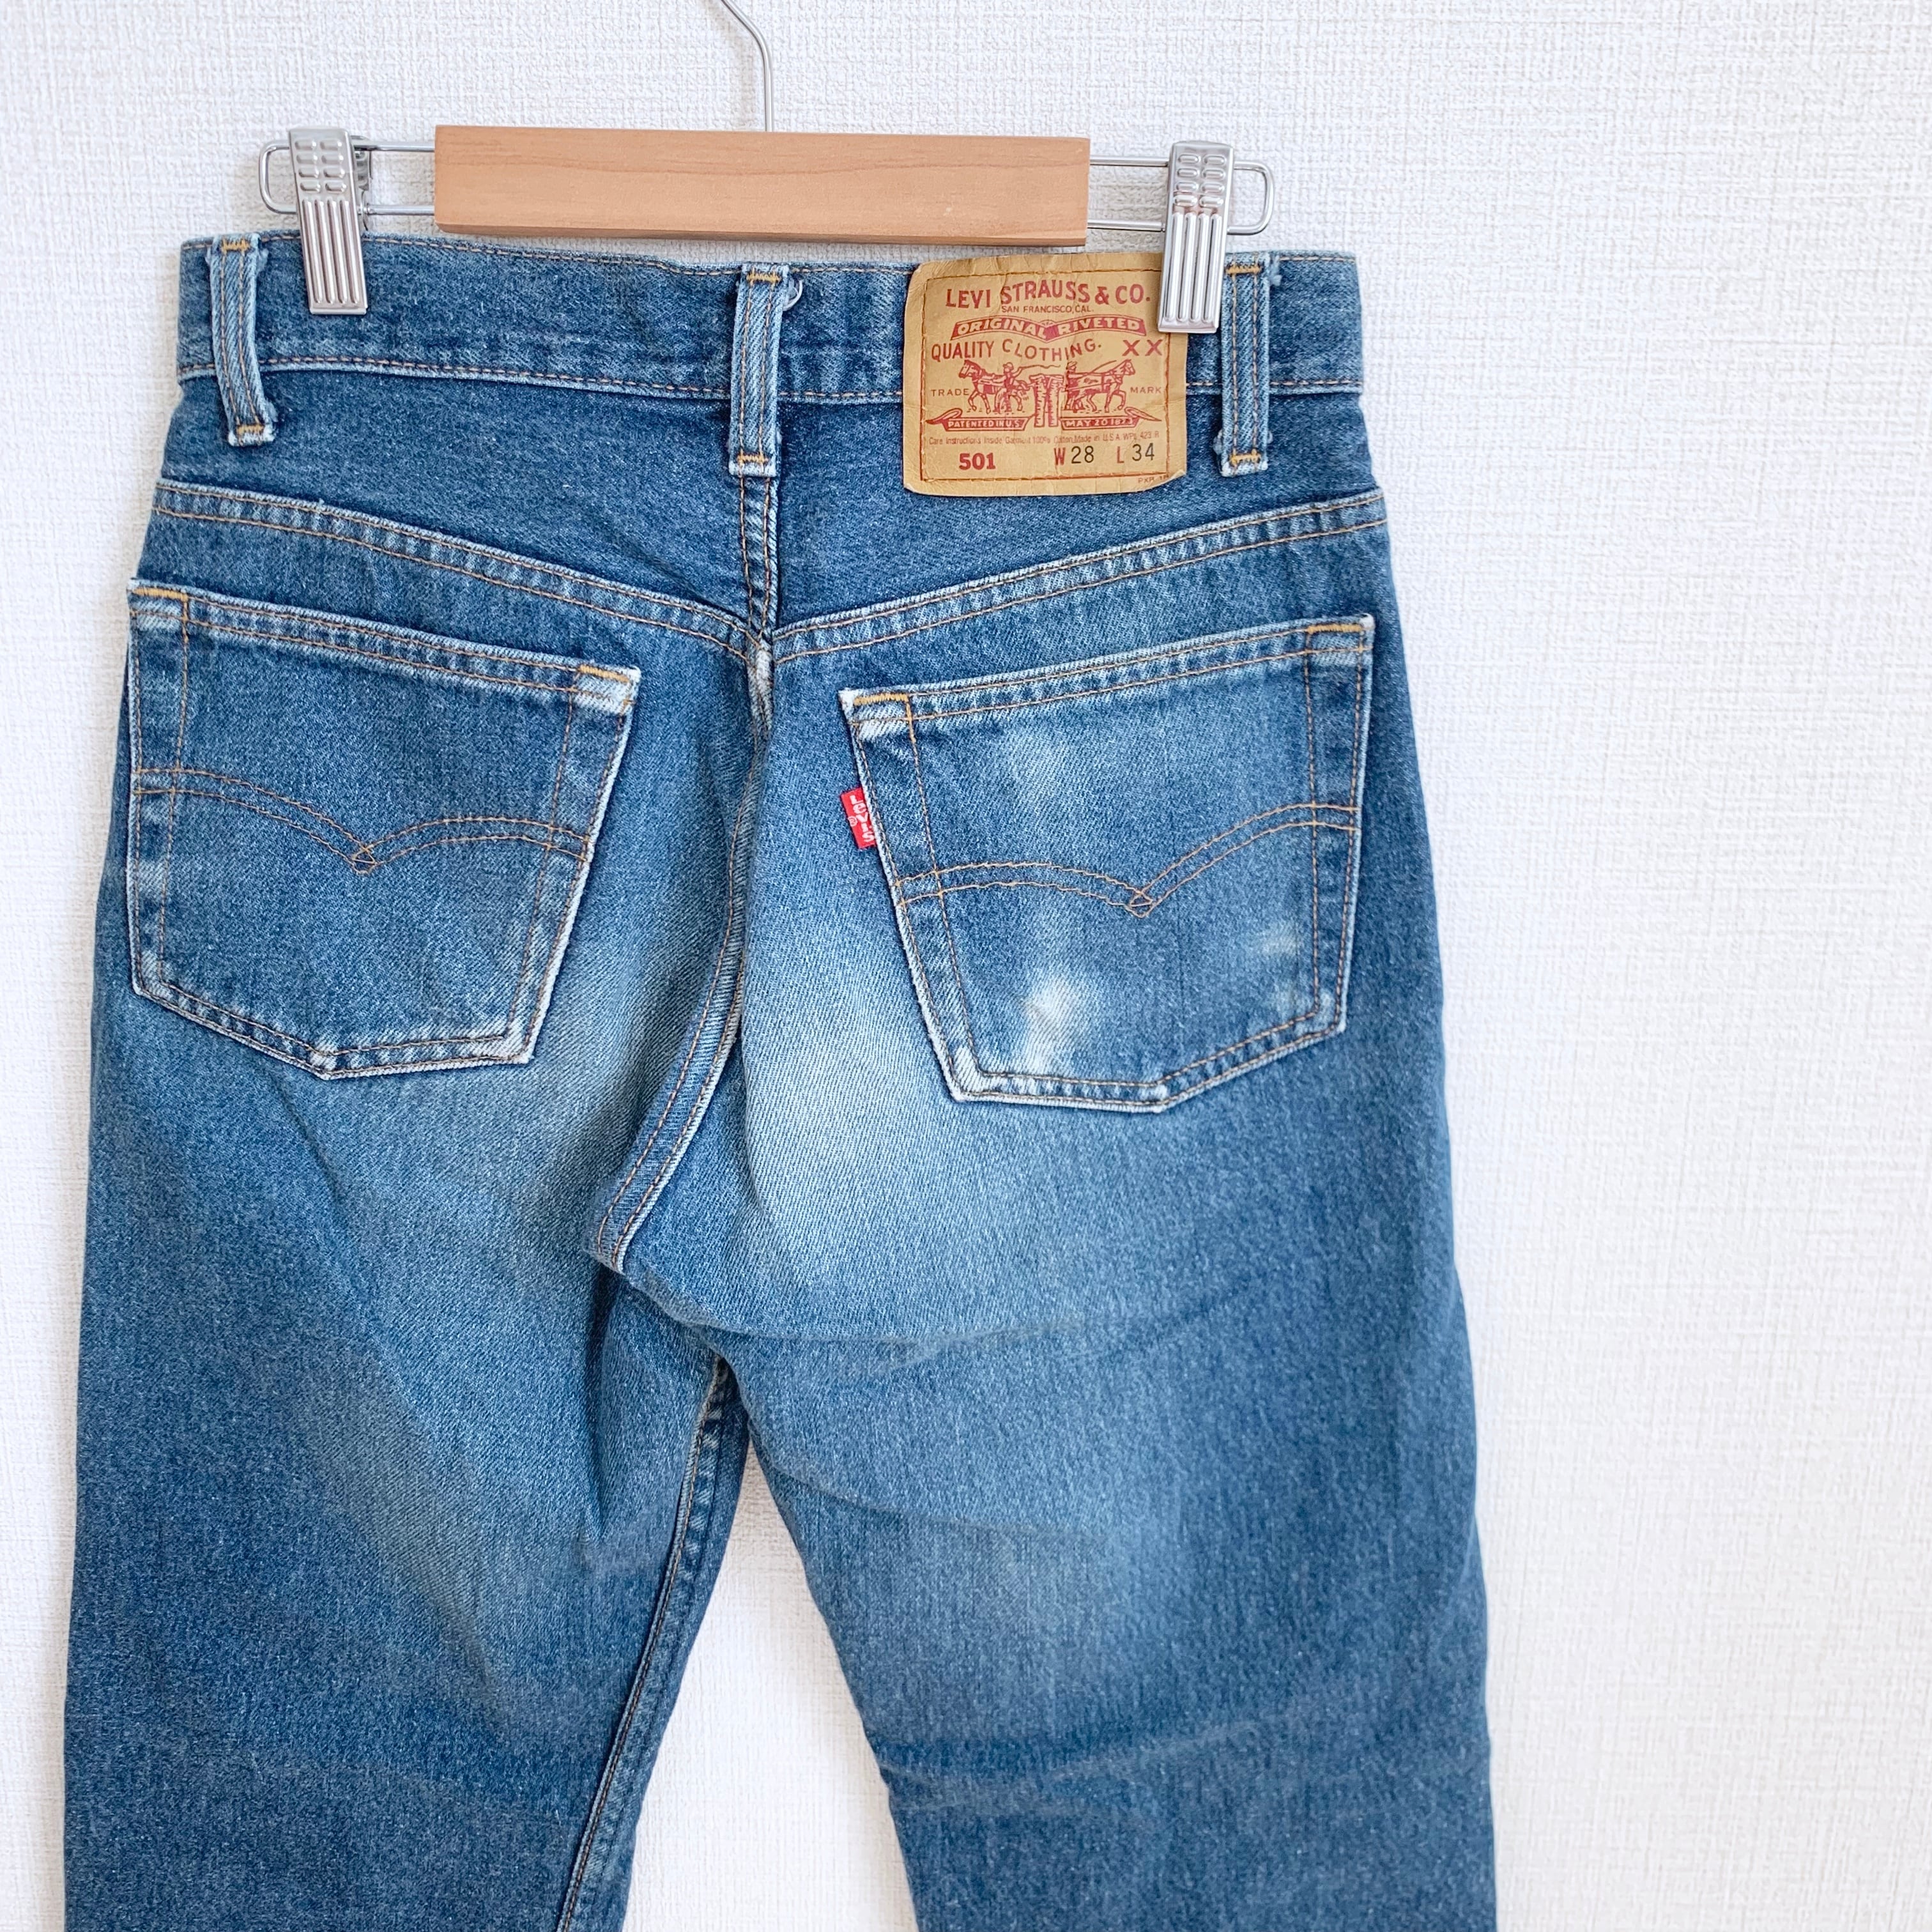 90's MADE in USA Levi's リーバイス 501 74 | ＳＥＣＯＮＤ HAND RED